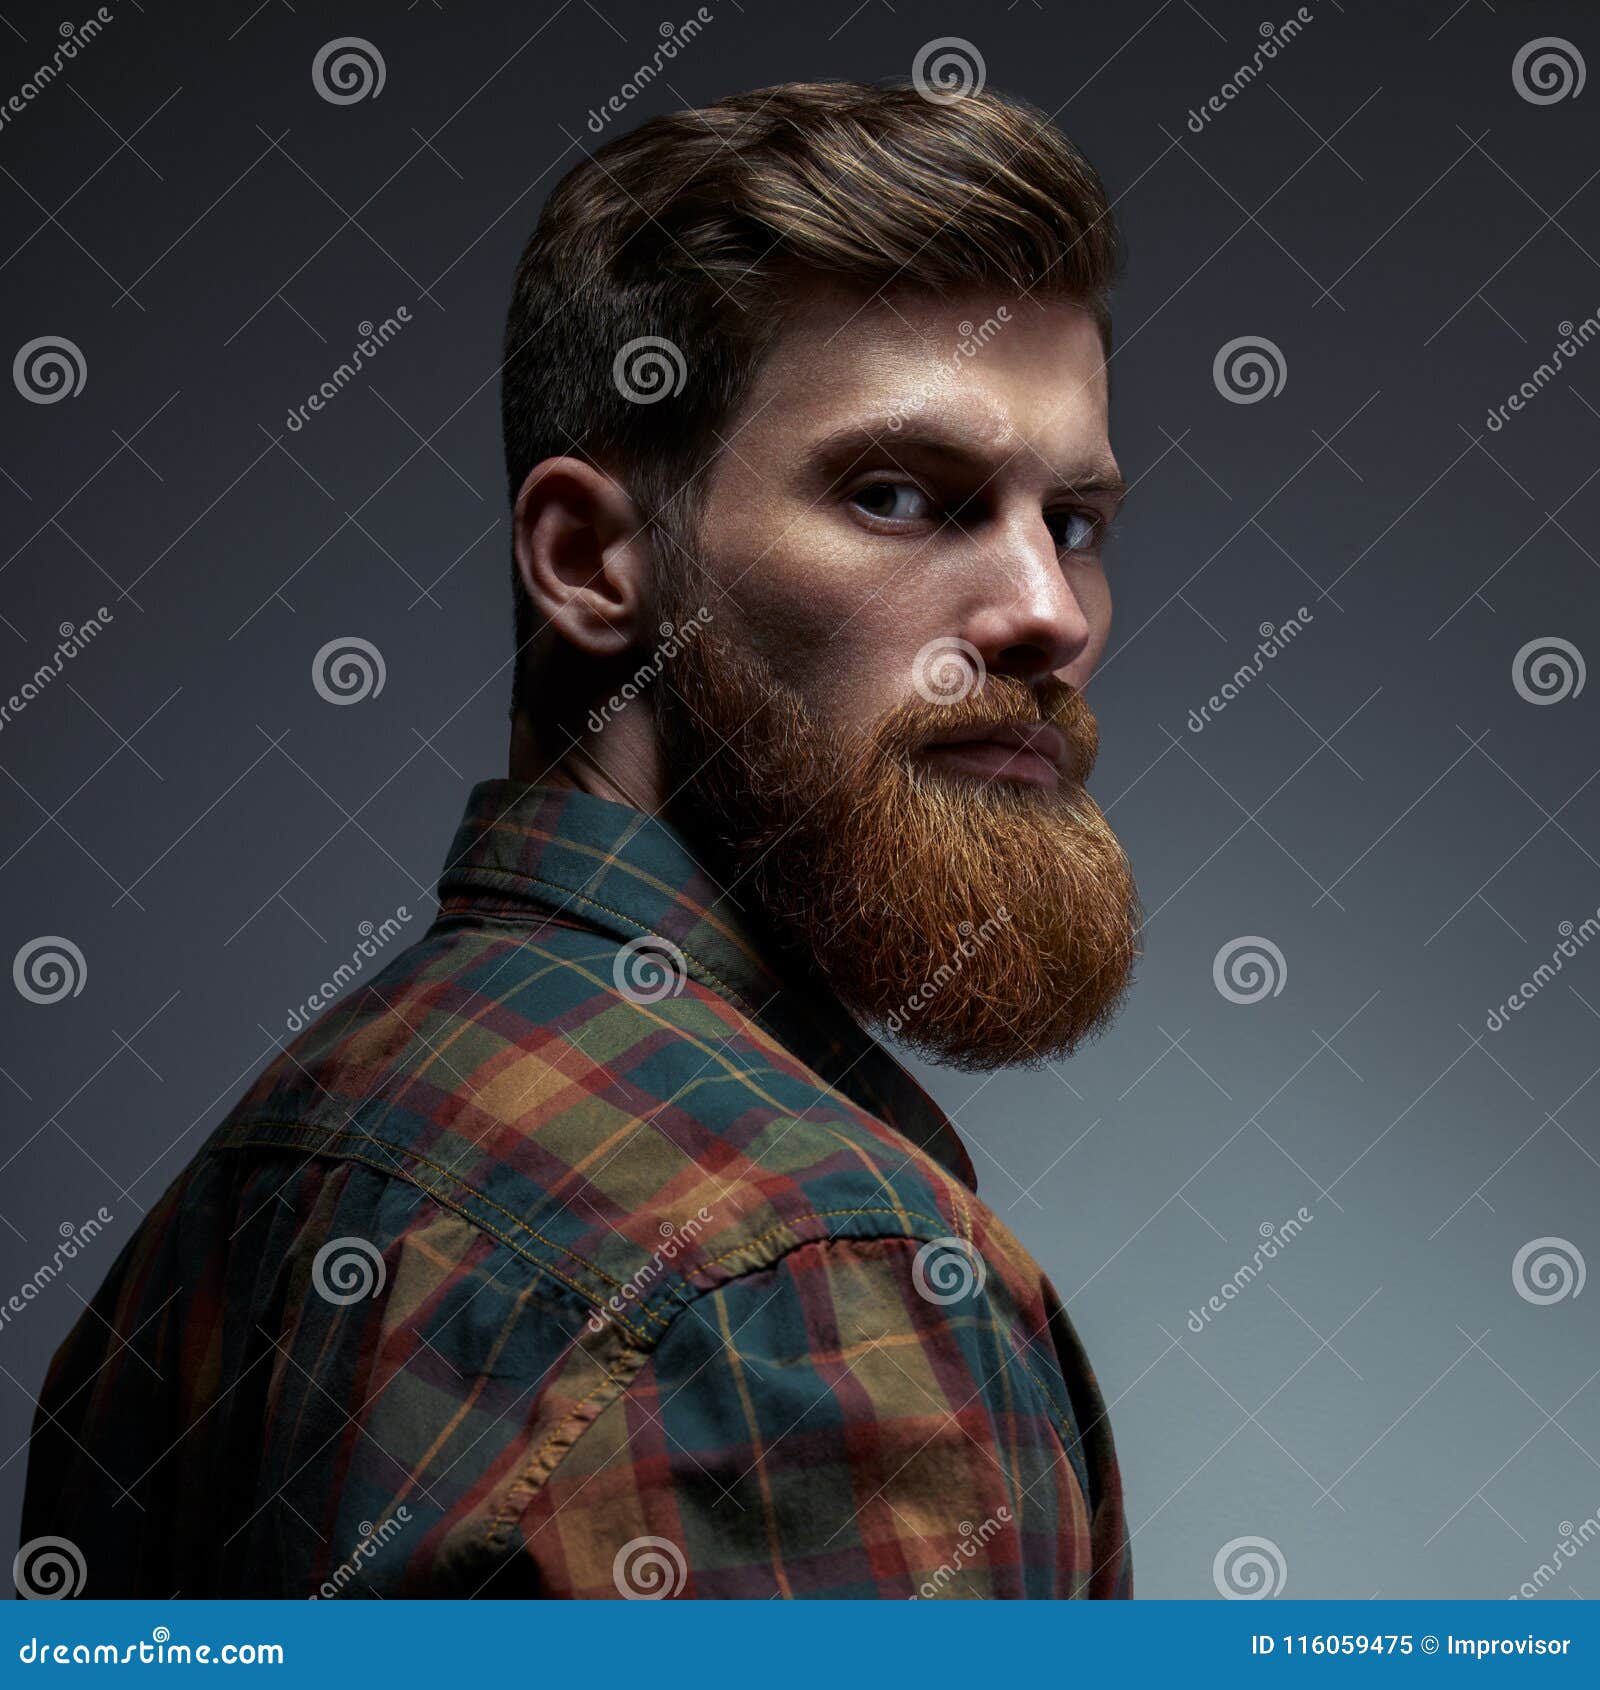 Top 80 Hairstyles For Men With Beards  Haircut Inspiration